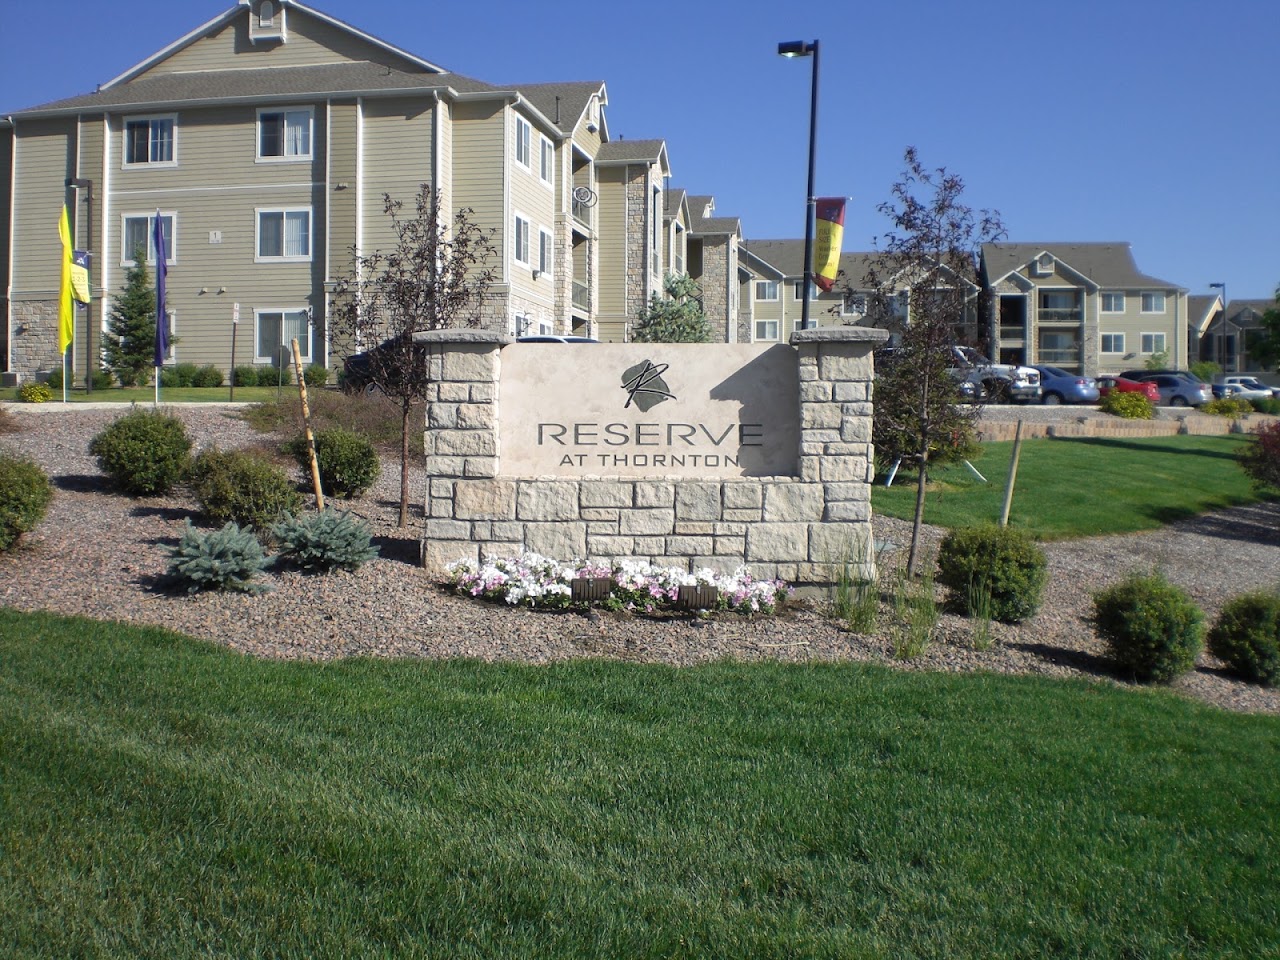 Photo of RESERVE AT THORNTON I. Affordable housing located at 9700 WELBY RD THORNTON, CO 80229